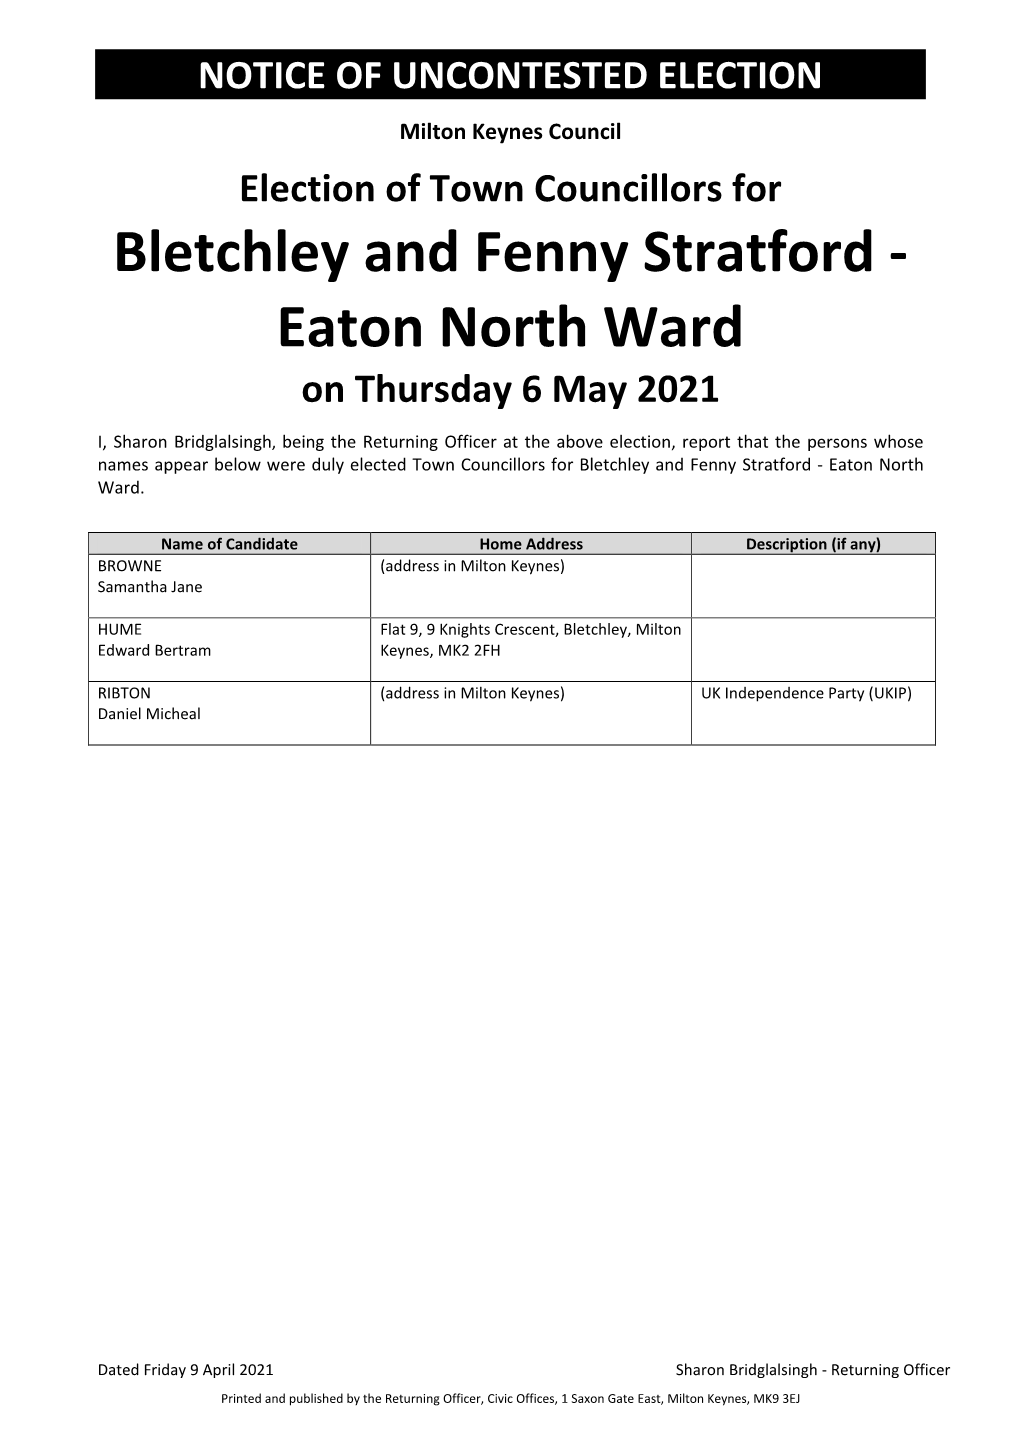 Bletchley & Fenny Stratford Town Council